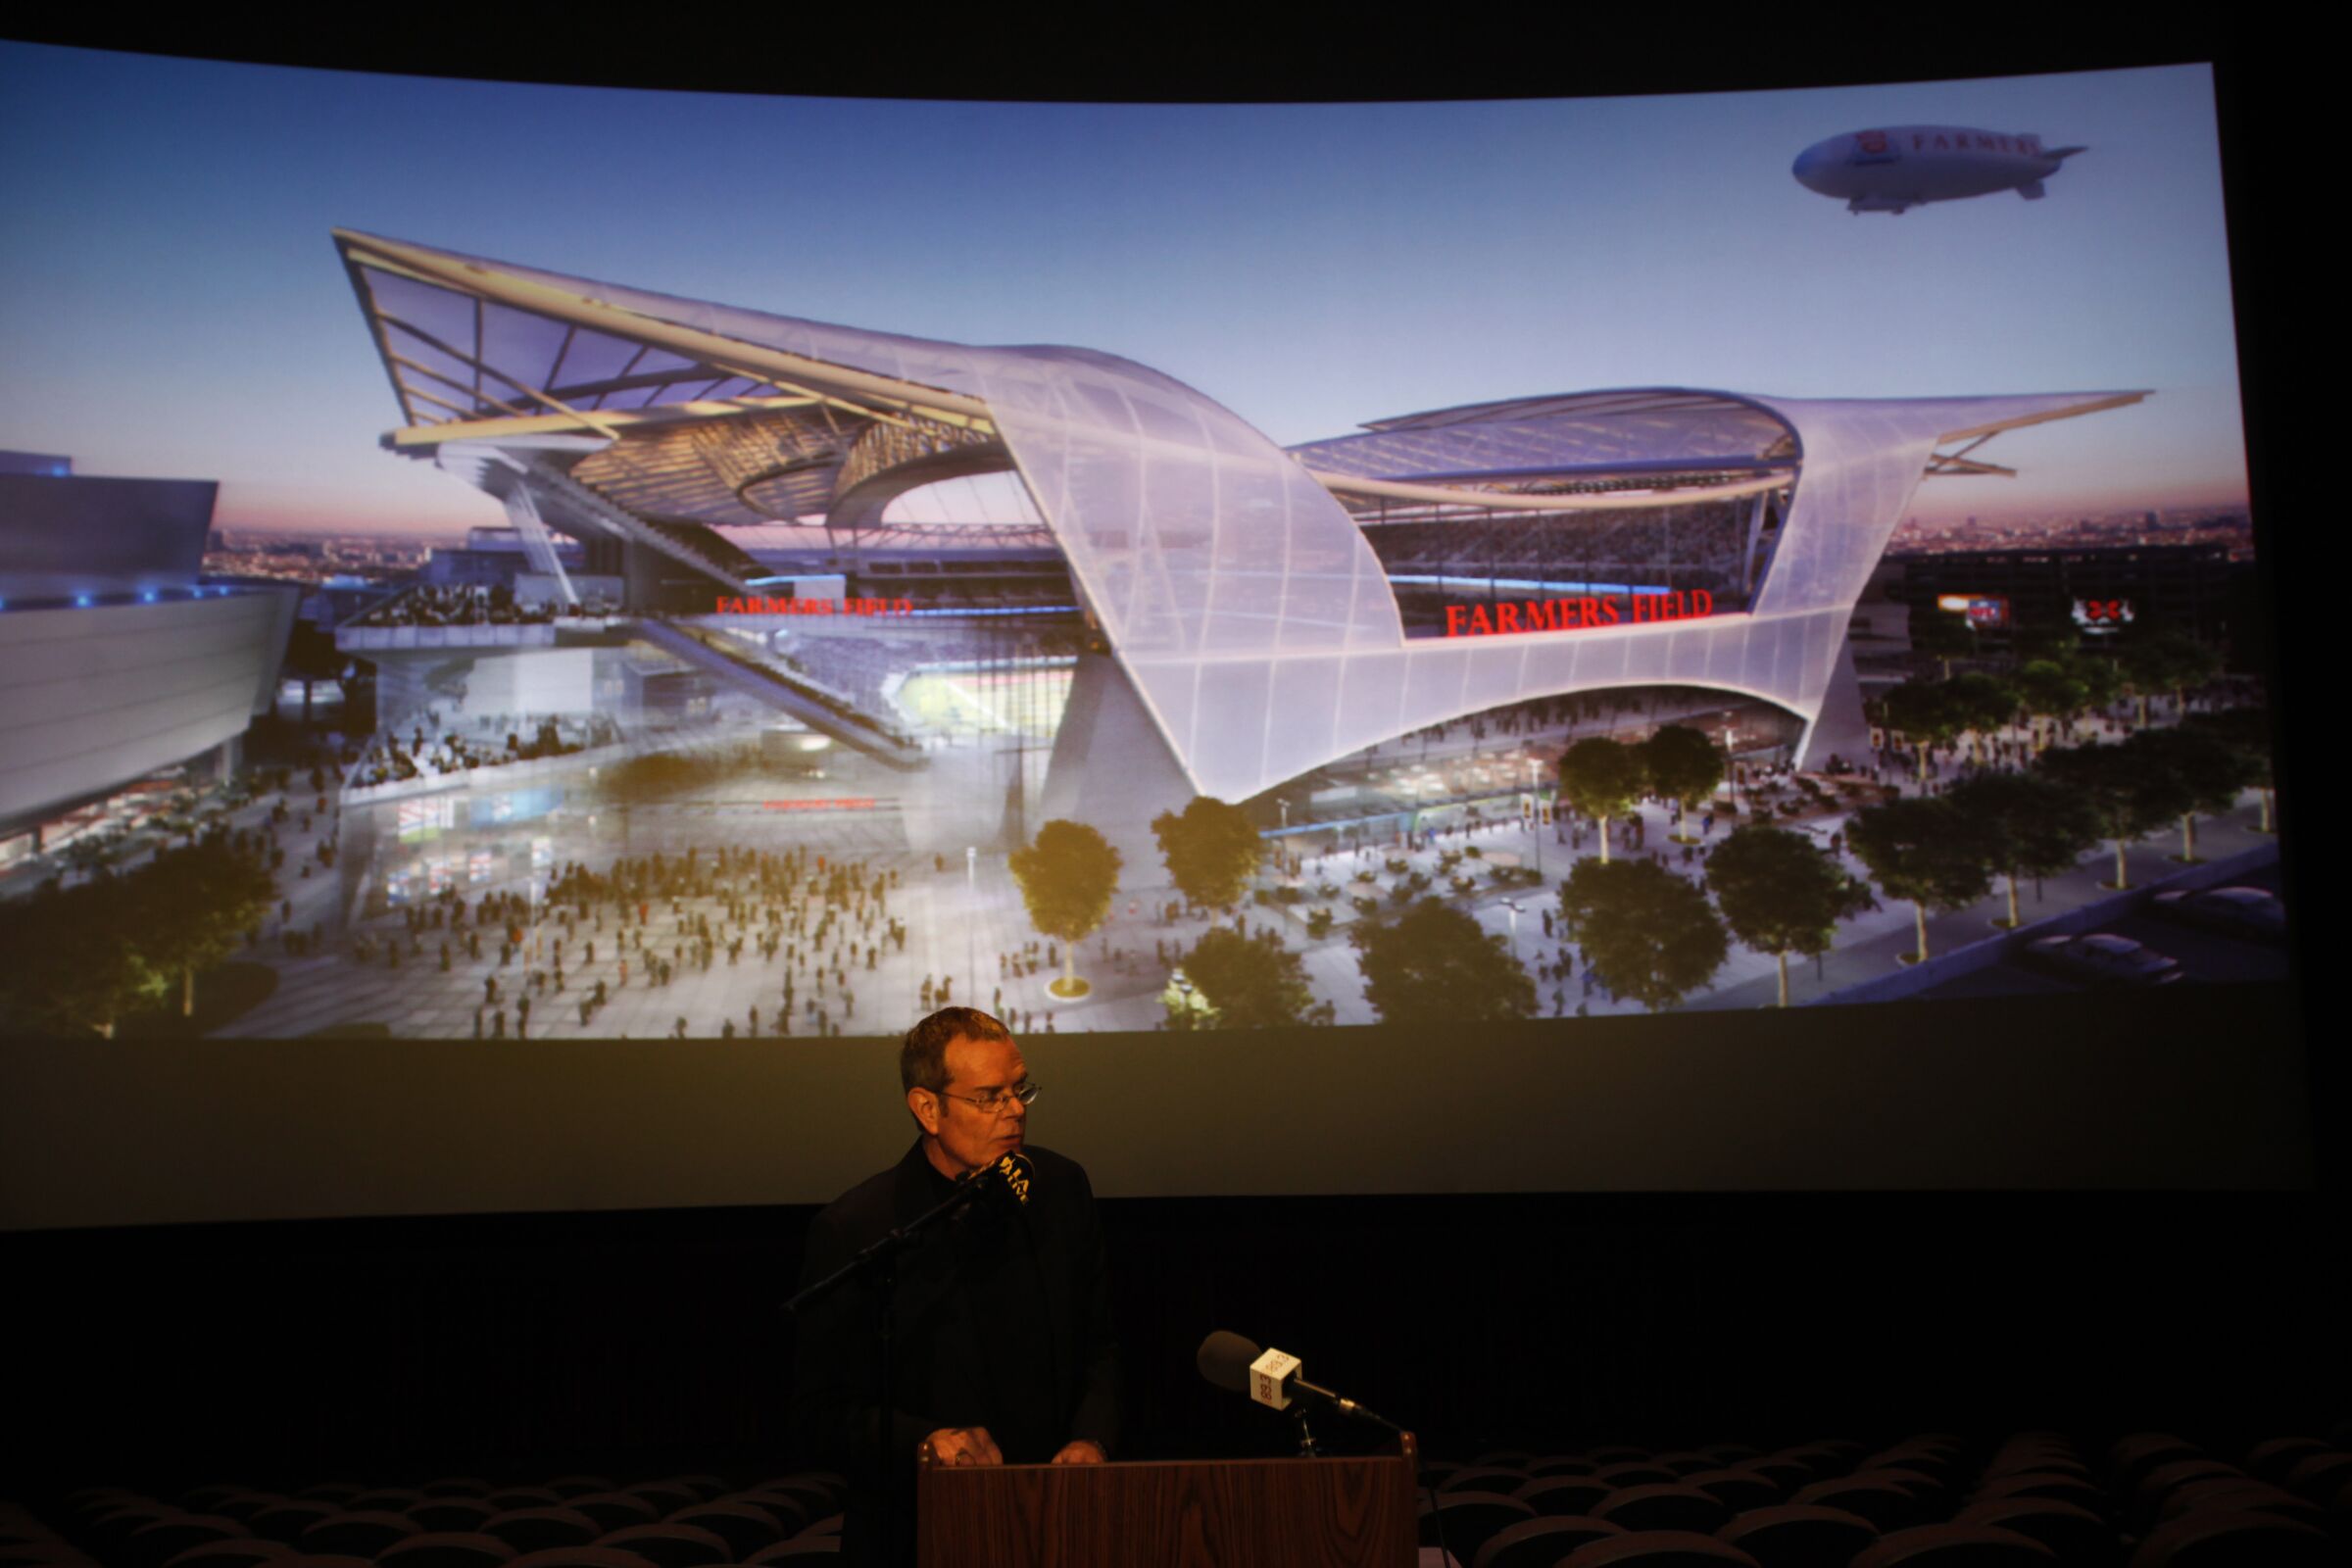 Ron Turner, the principal at architectural firm Gensler, shows images of AEG's proposed Farmers Field in downtown Los Angeles